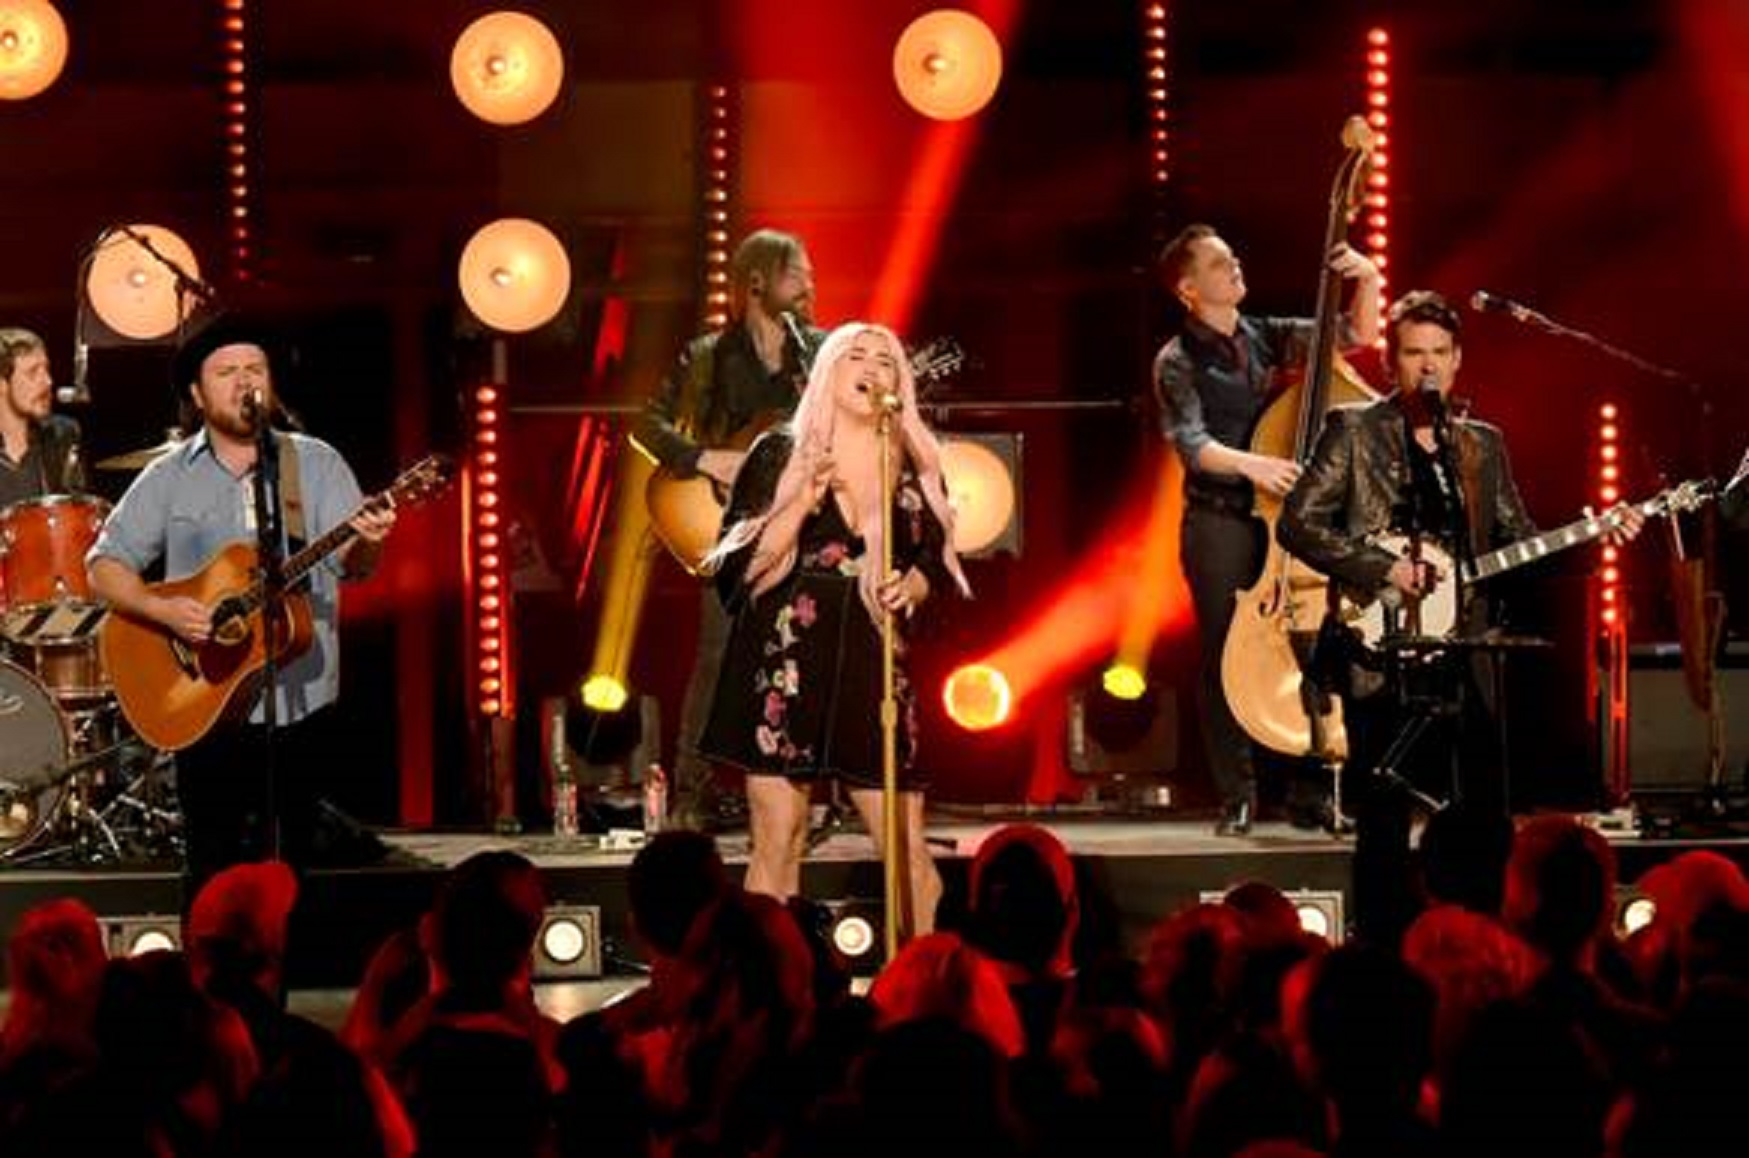 OLD CROW MEDICINE SHOW JOINS KESHA  FOR ALL-NEW EPISODE OF “CMT CROSSROADS”